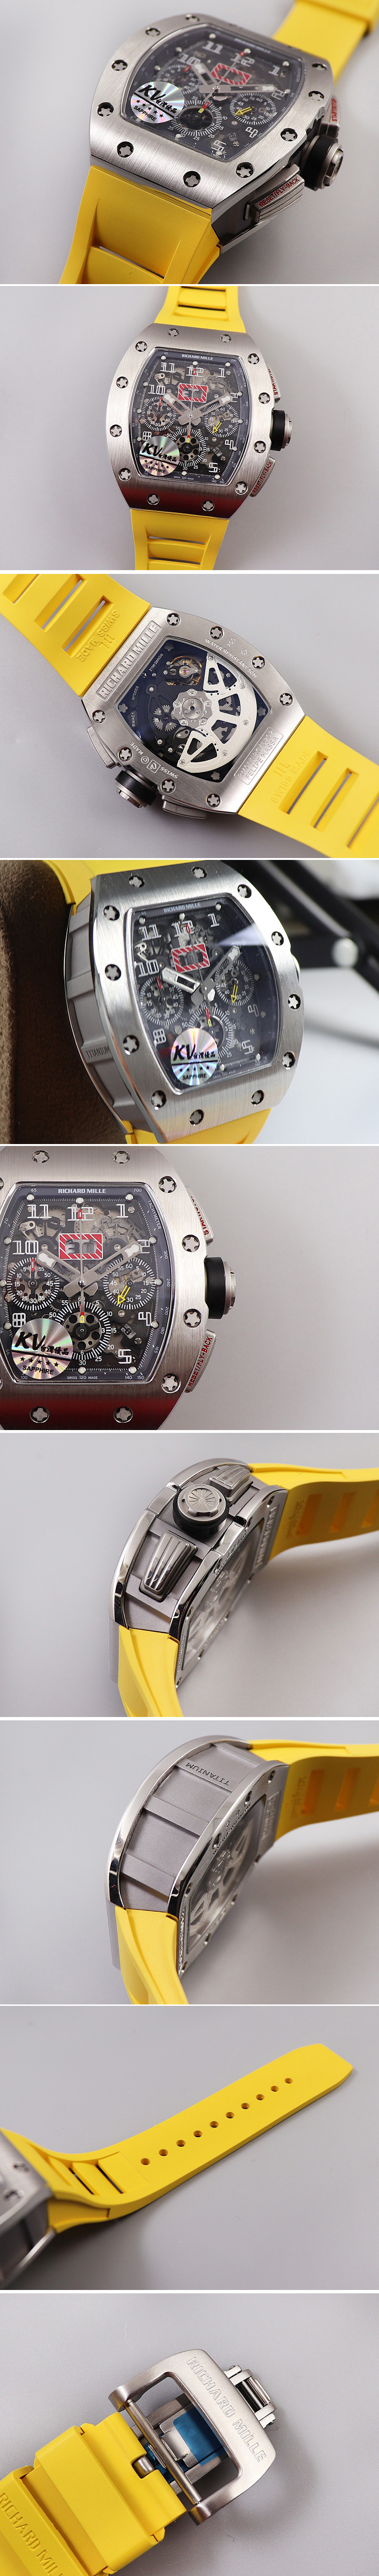 Replica Richard Mille RM011 SS Chrono KVF 1:1 Best Edition Crystal Dial Black on Yellow Rubber Strap A7750